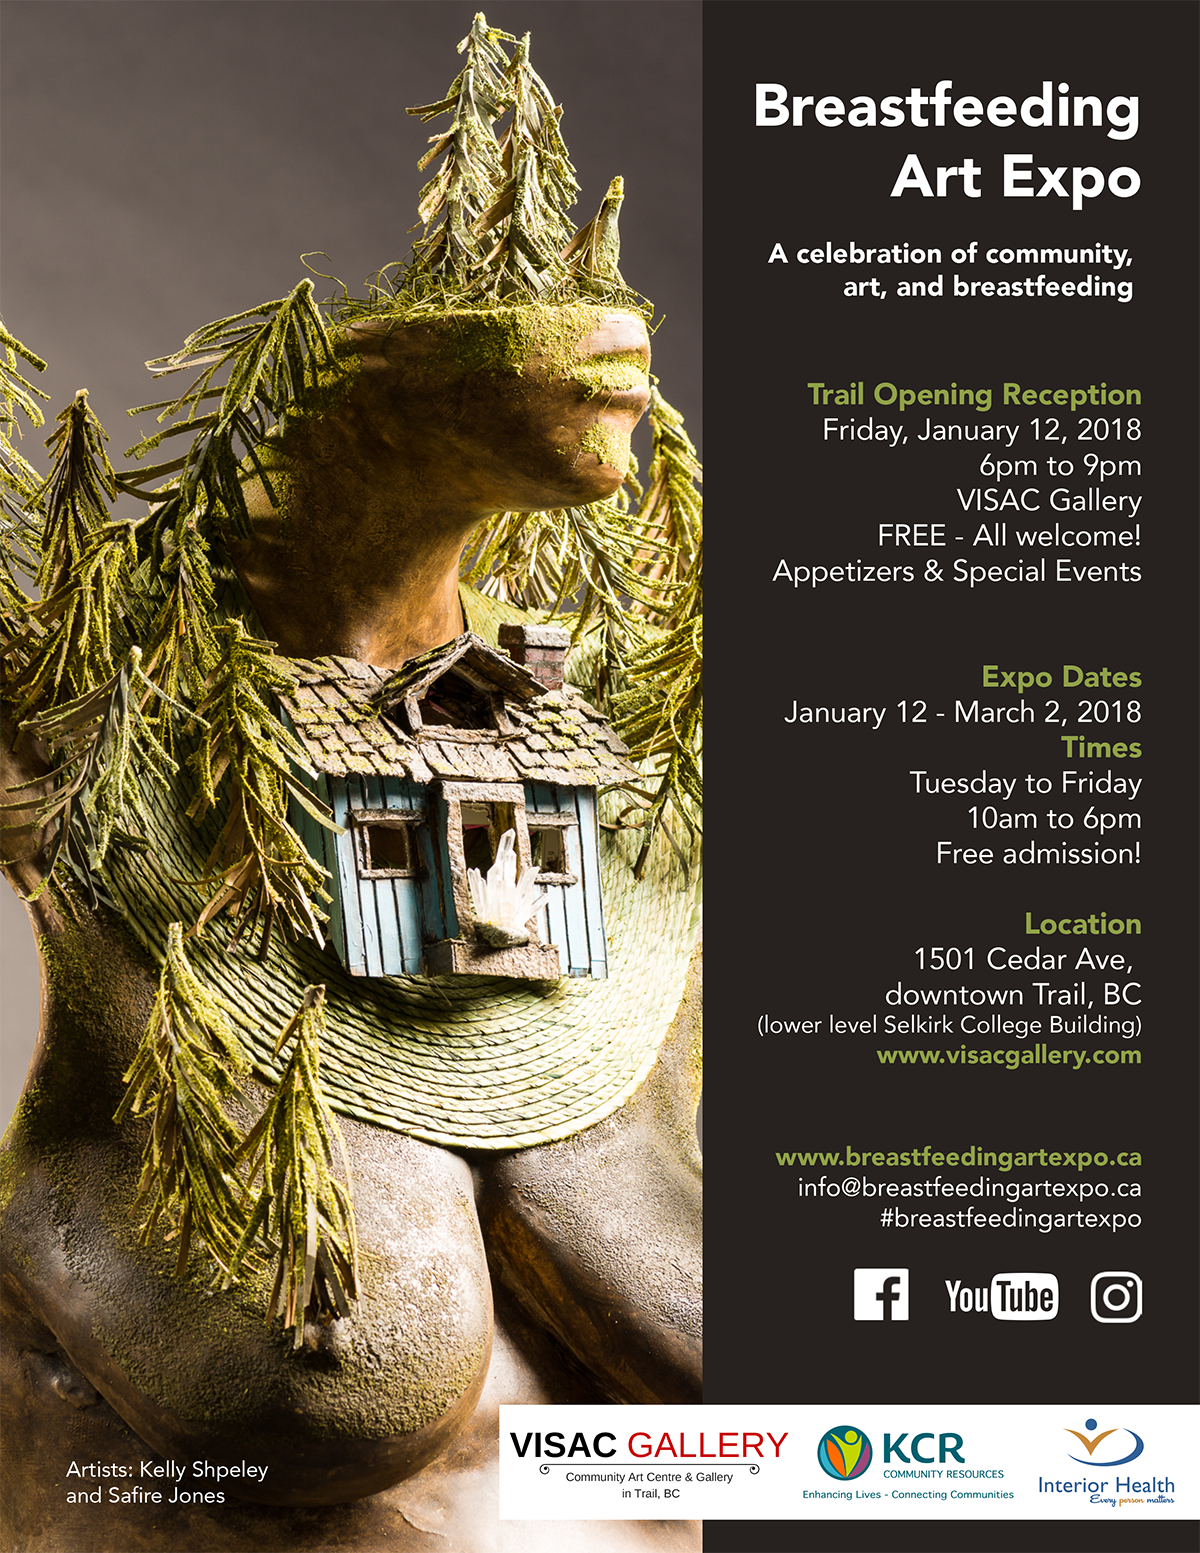 Breastfeeding Art Expo - Event Poster - Trail